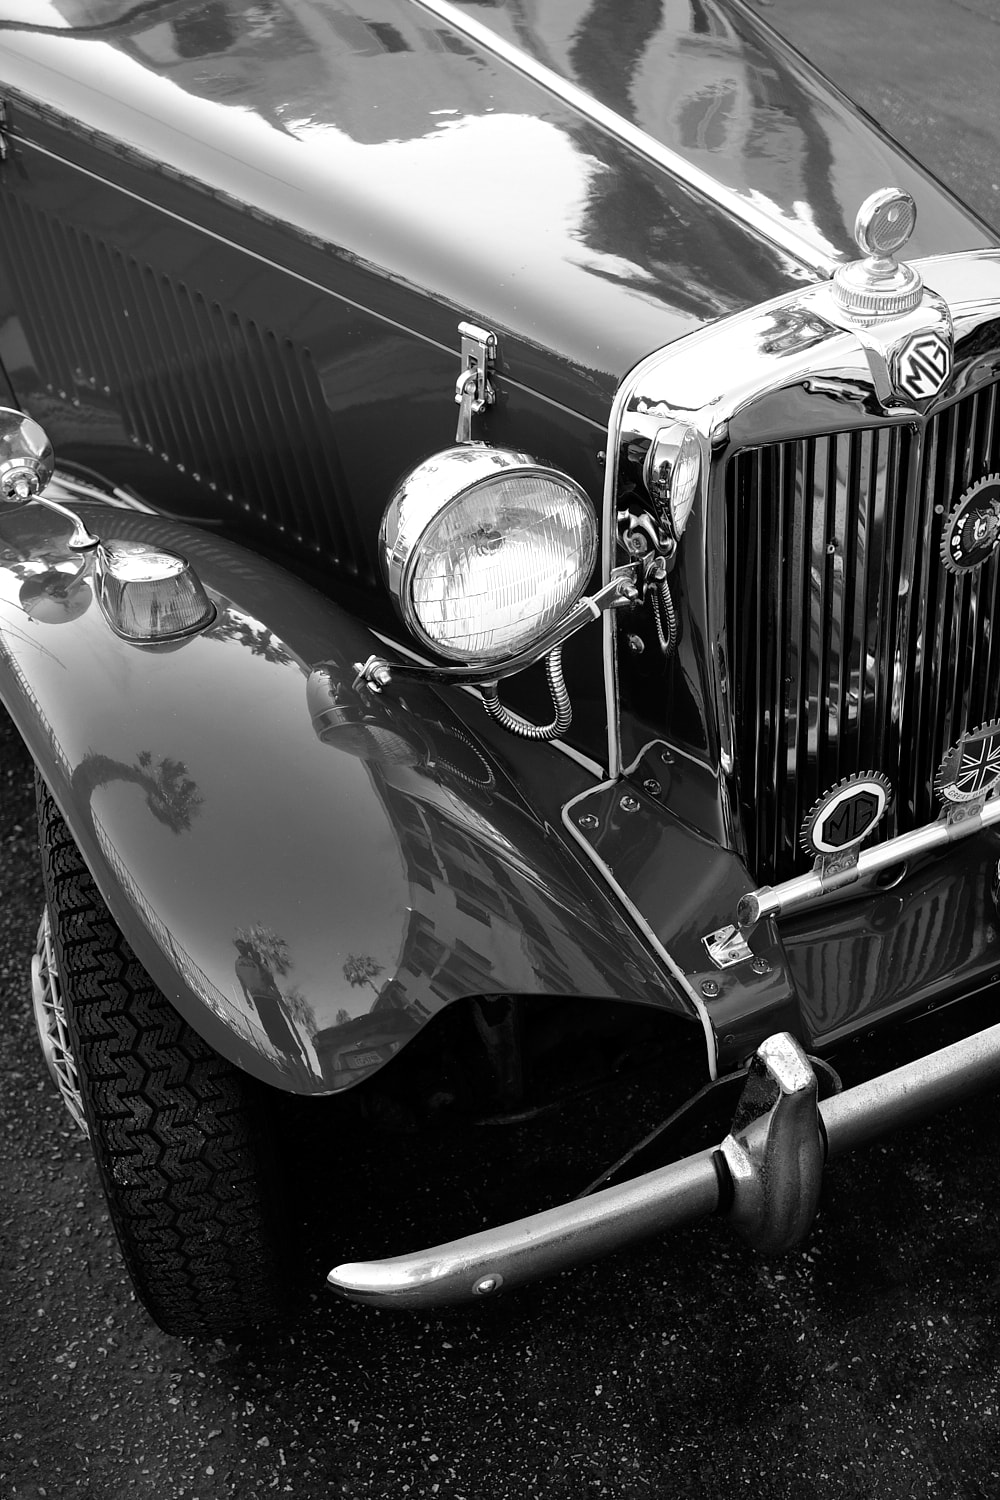 Black and white portrait photo of a close up of the grill and hood of an old MG sports car.